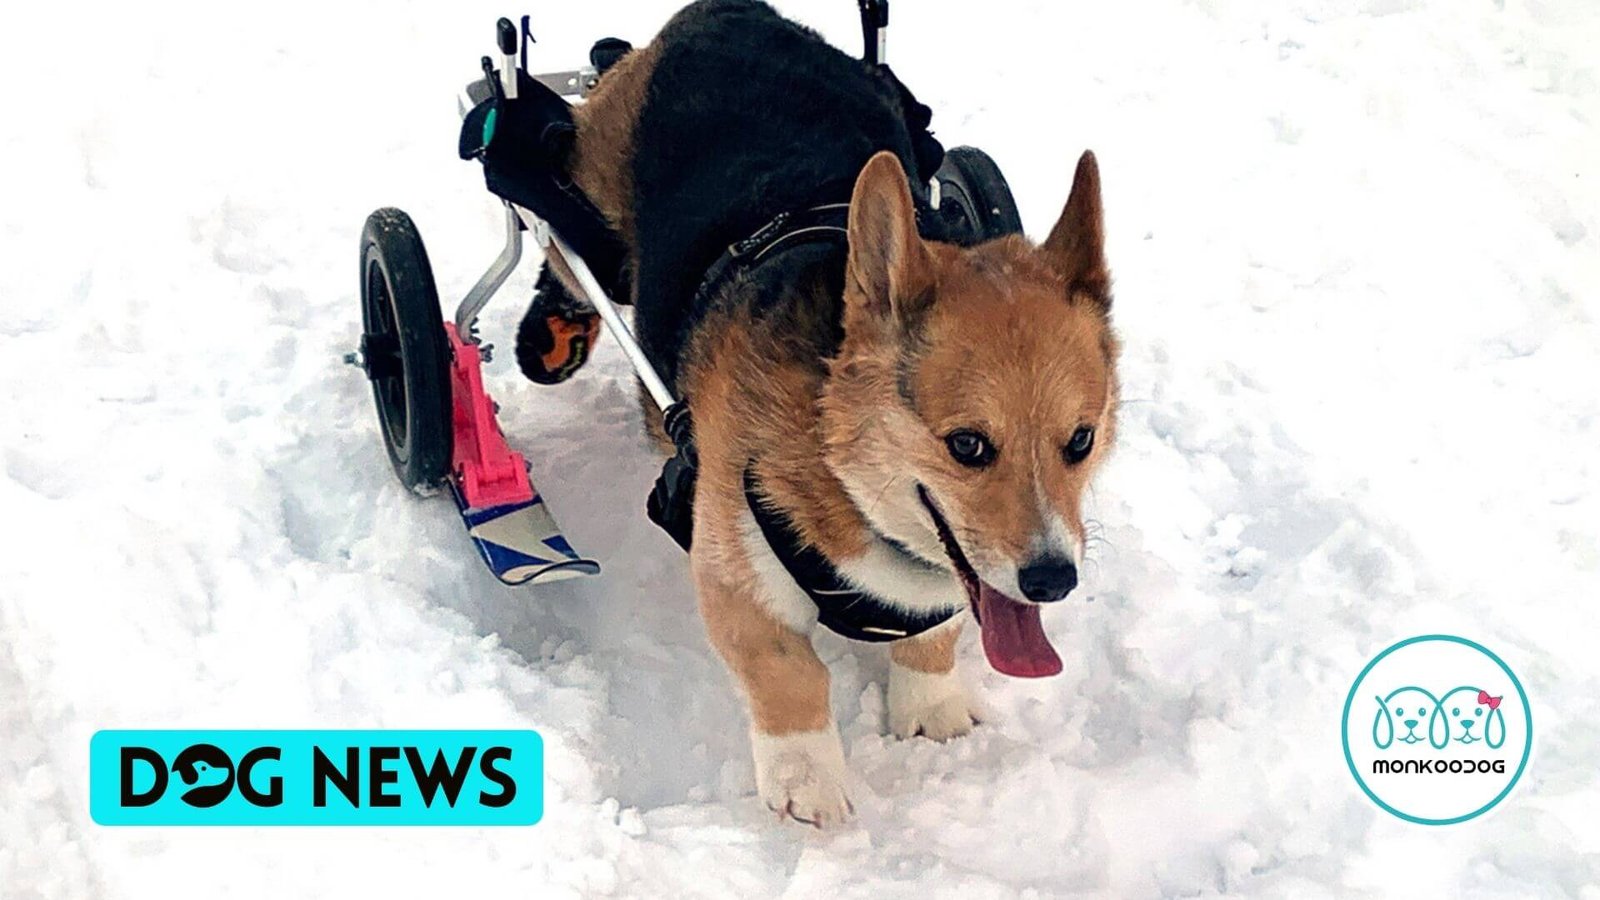 An Engineer from Nebraska Designs Skis for his Pet's